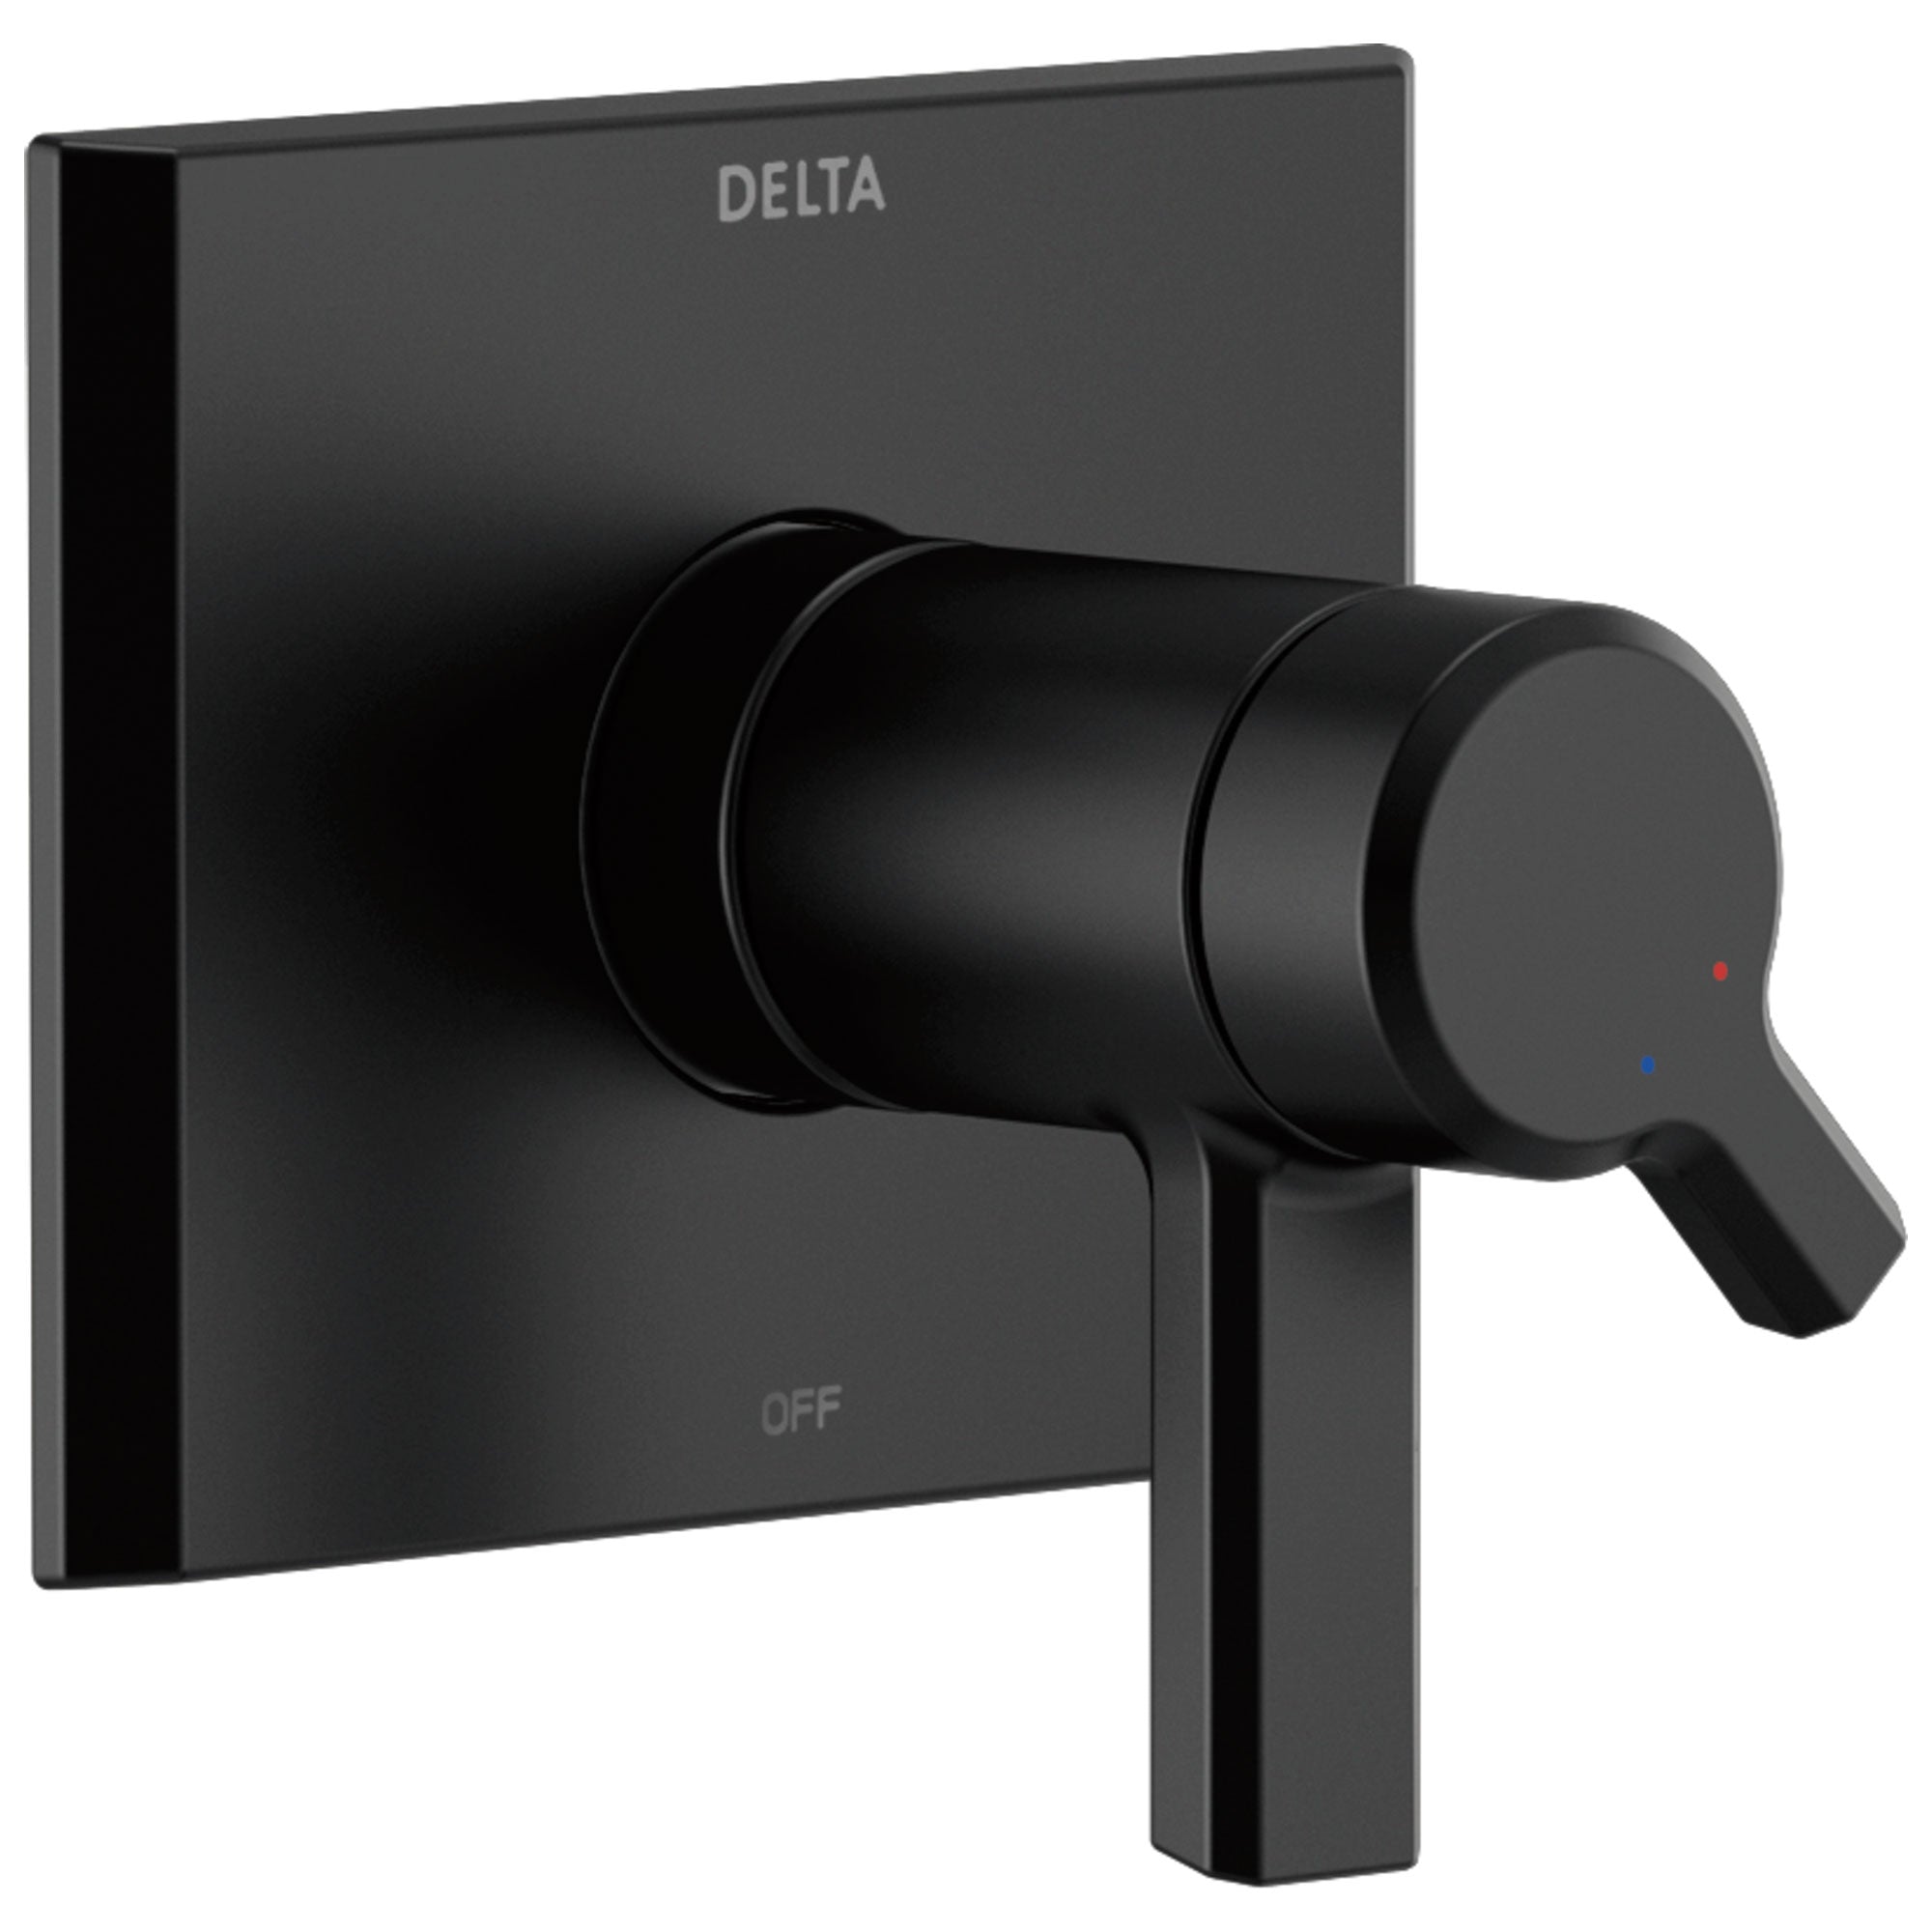 Delta Pivotal Matte Black Finish Thermostatic Shower Faucet Dual Handle Control Includes 17T Cartridge, Handles, and Valve with Stops D3306V